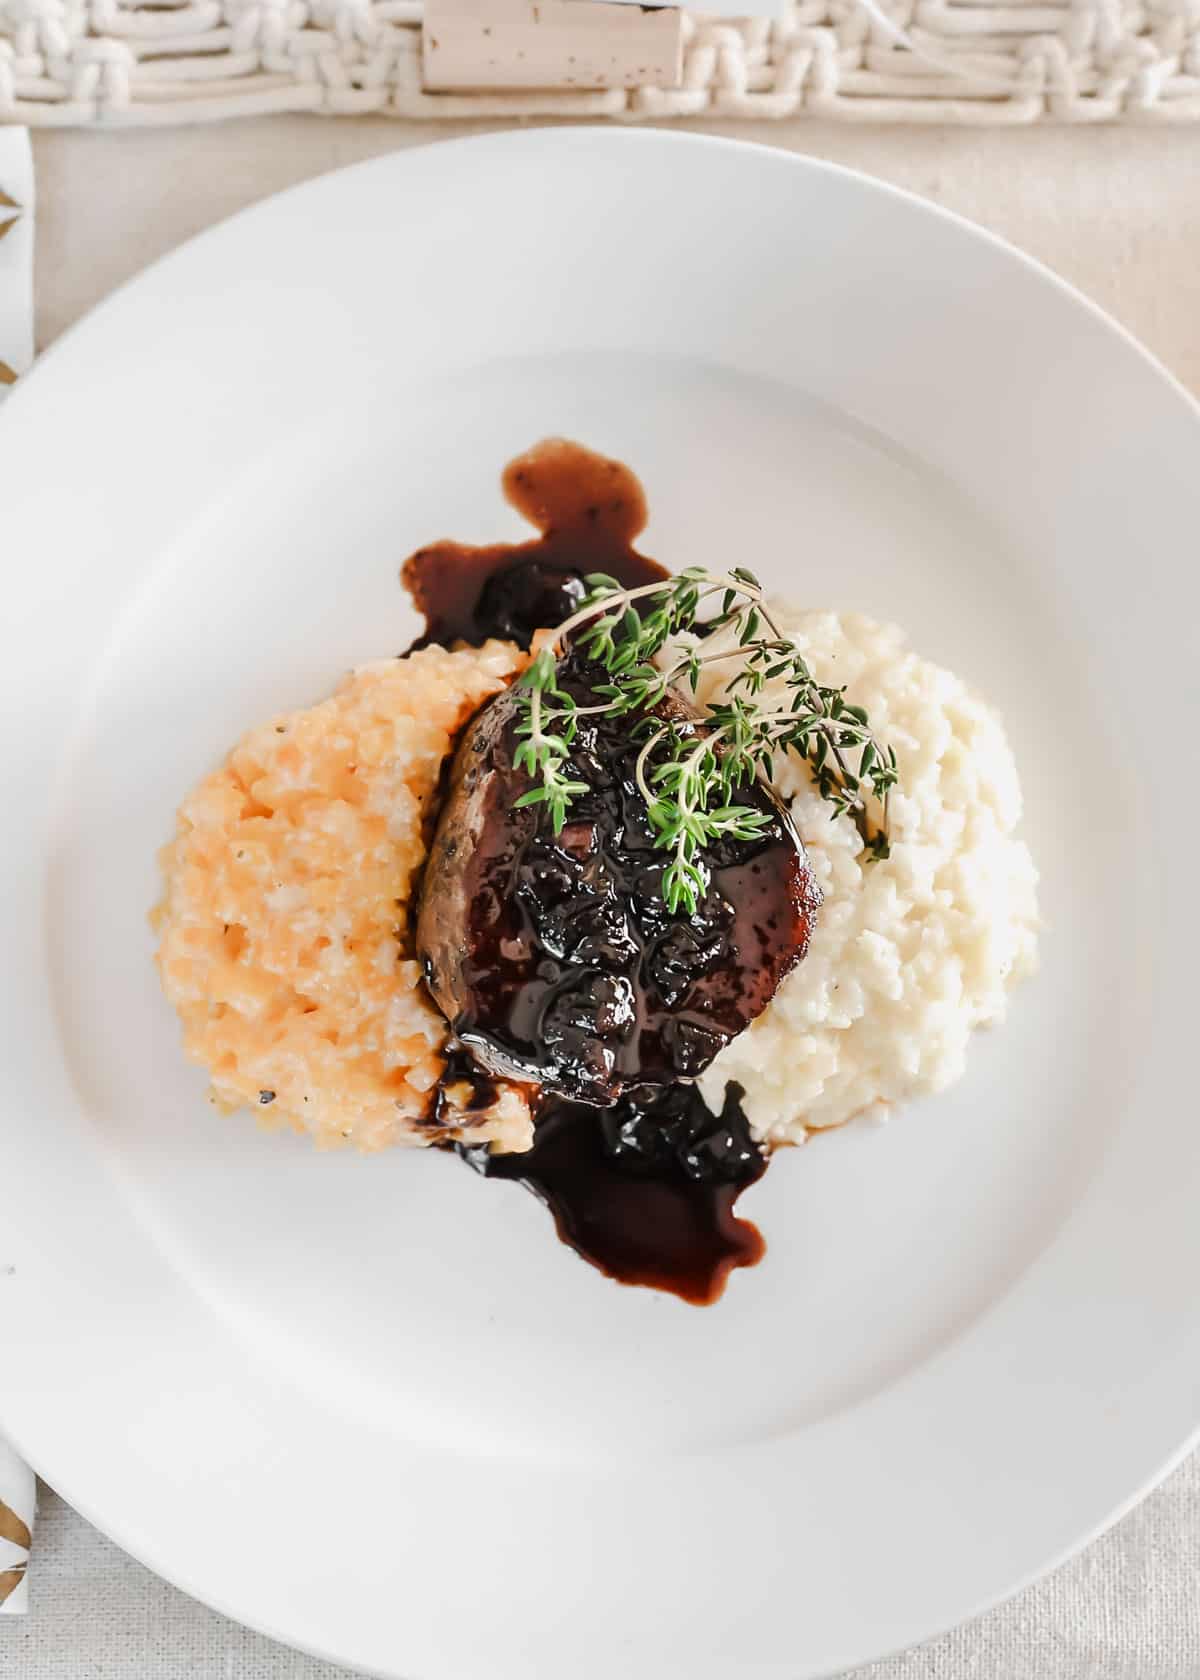 filet mignon topped with glaze, served on a bed of risotto and riced cauliflower on white plate.